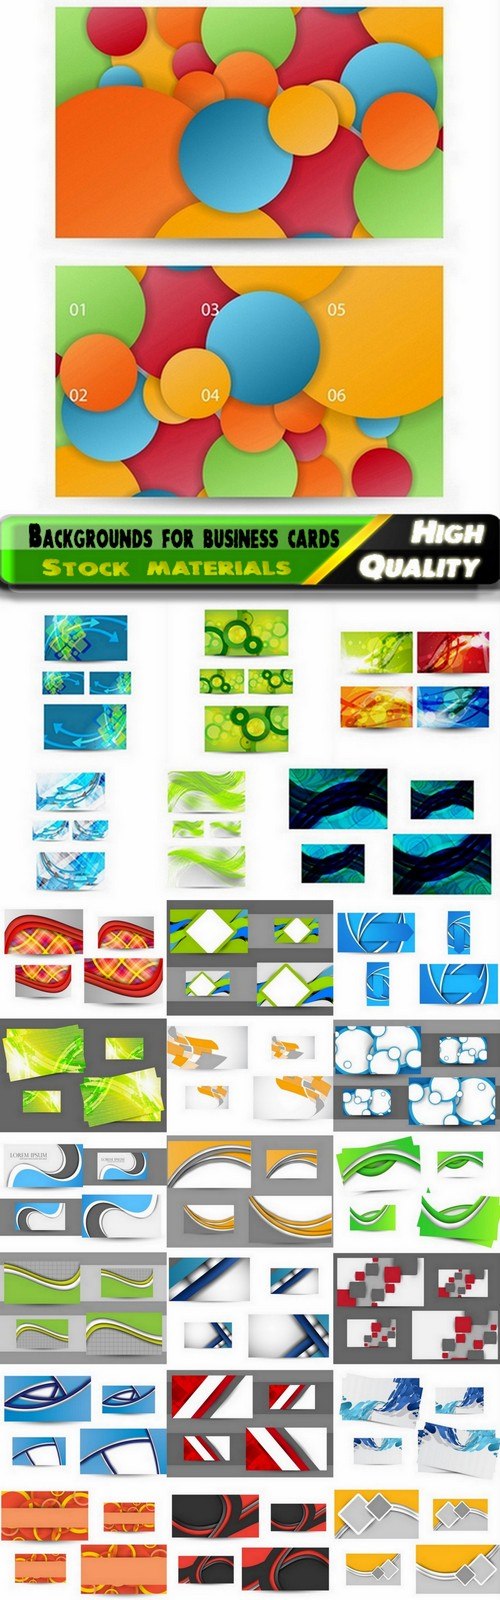 Abstract backgrounds for business cards - 25 Eps